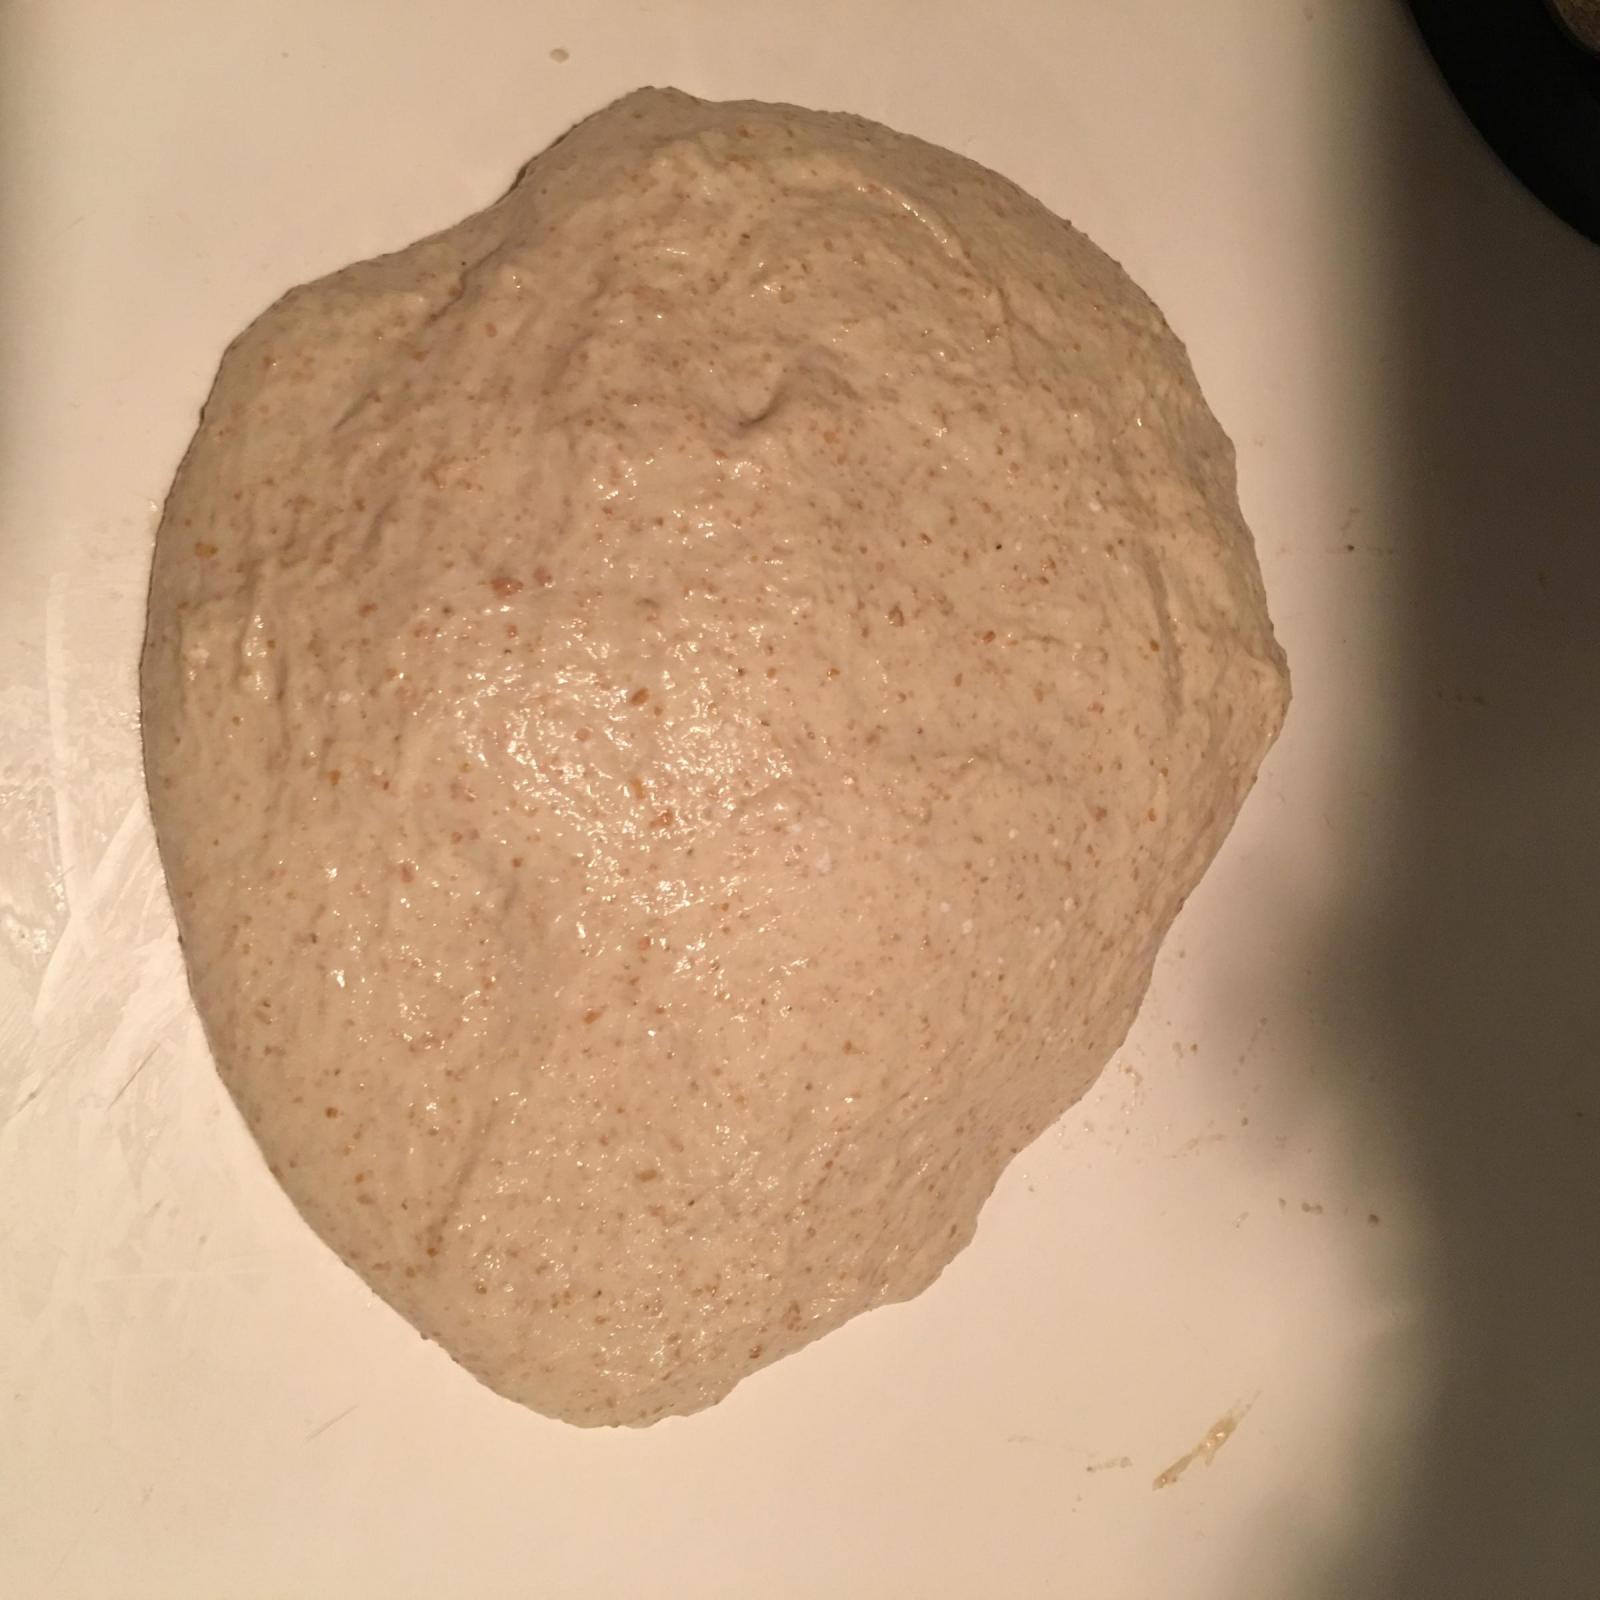 Dough after first pre-shaping attempt